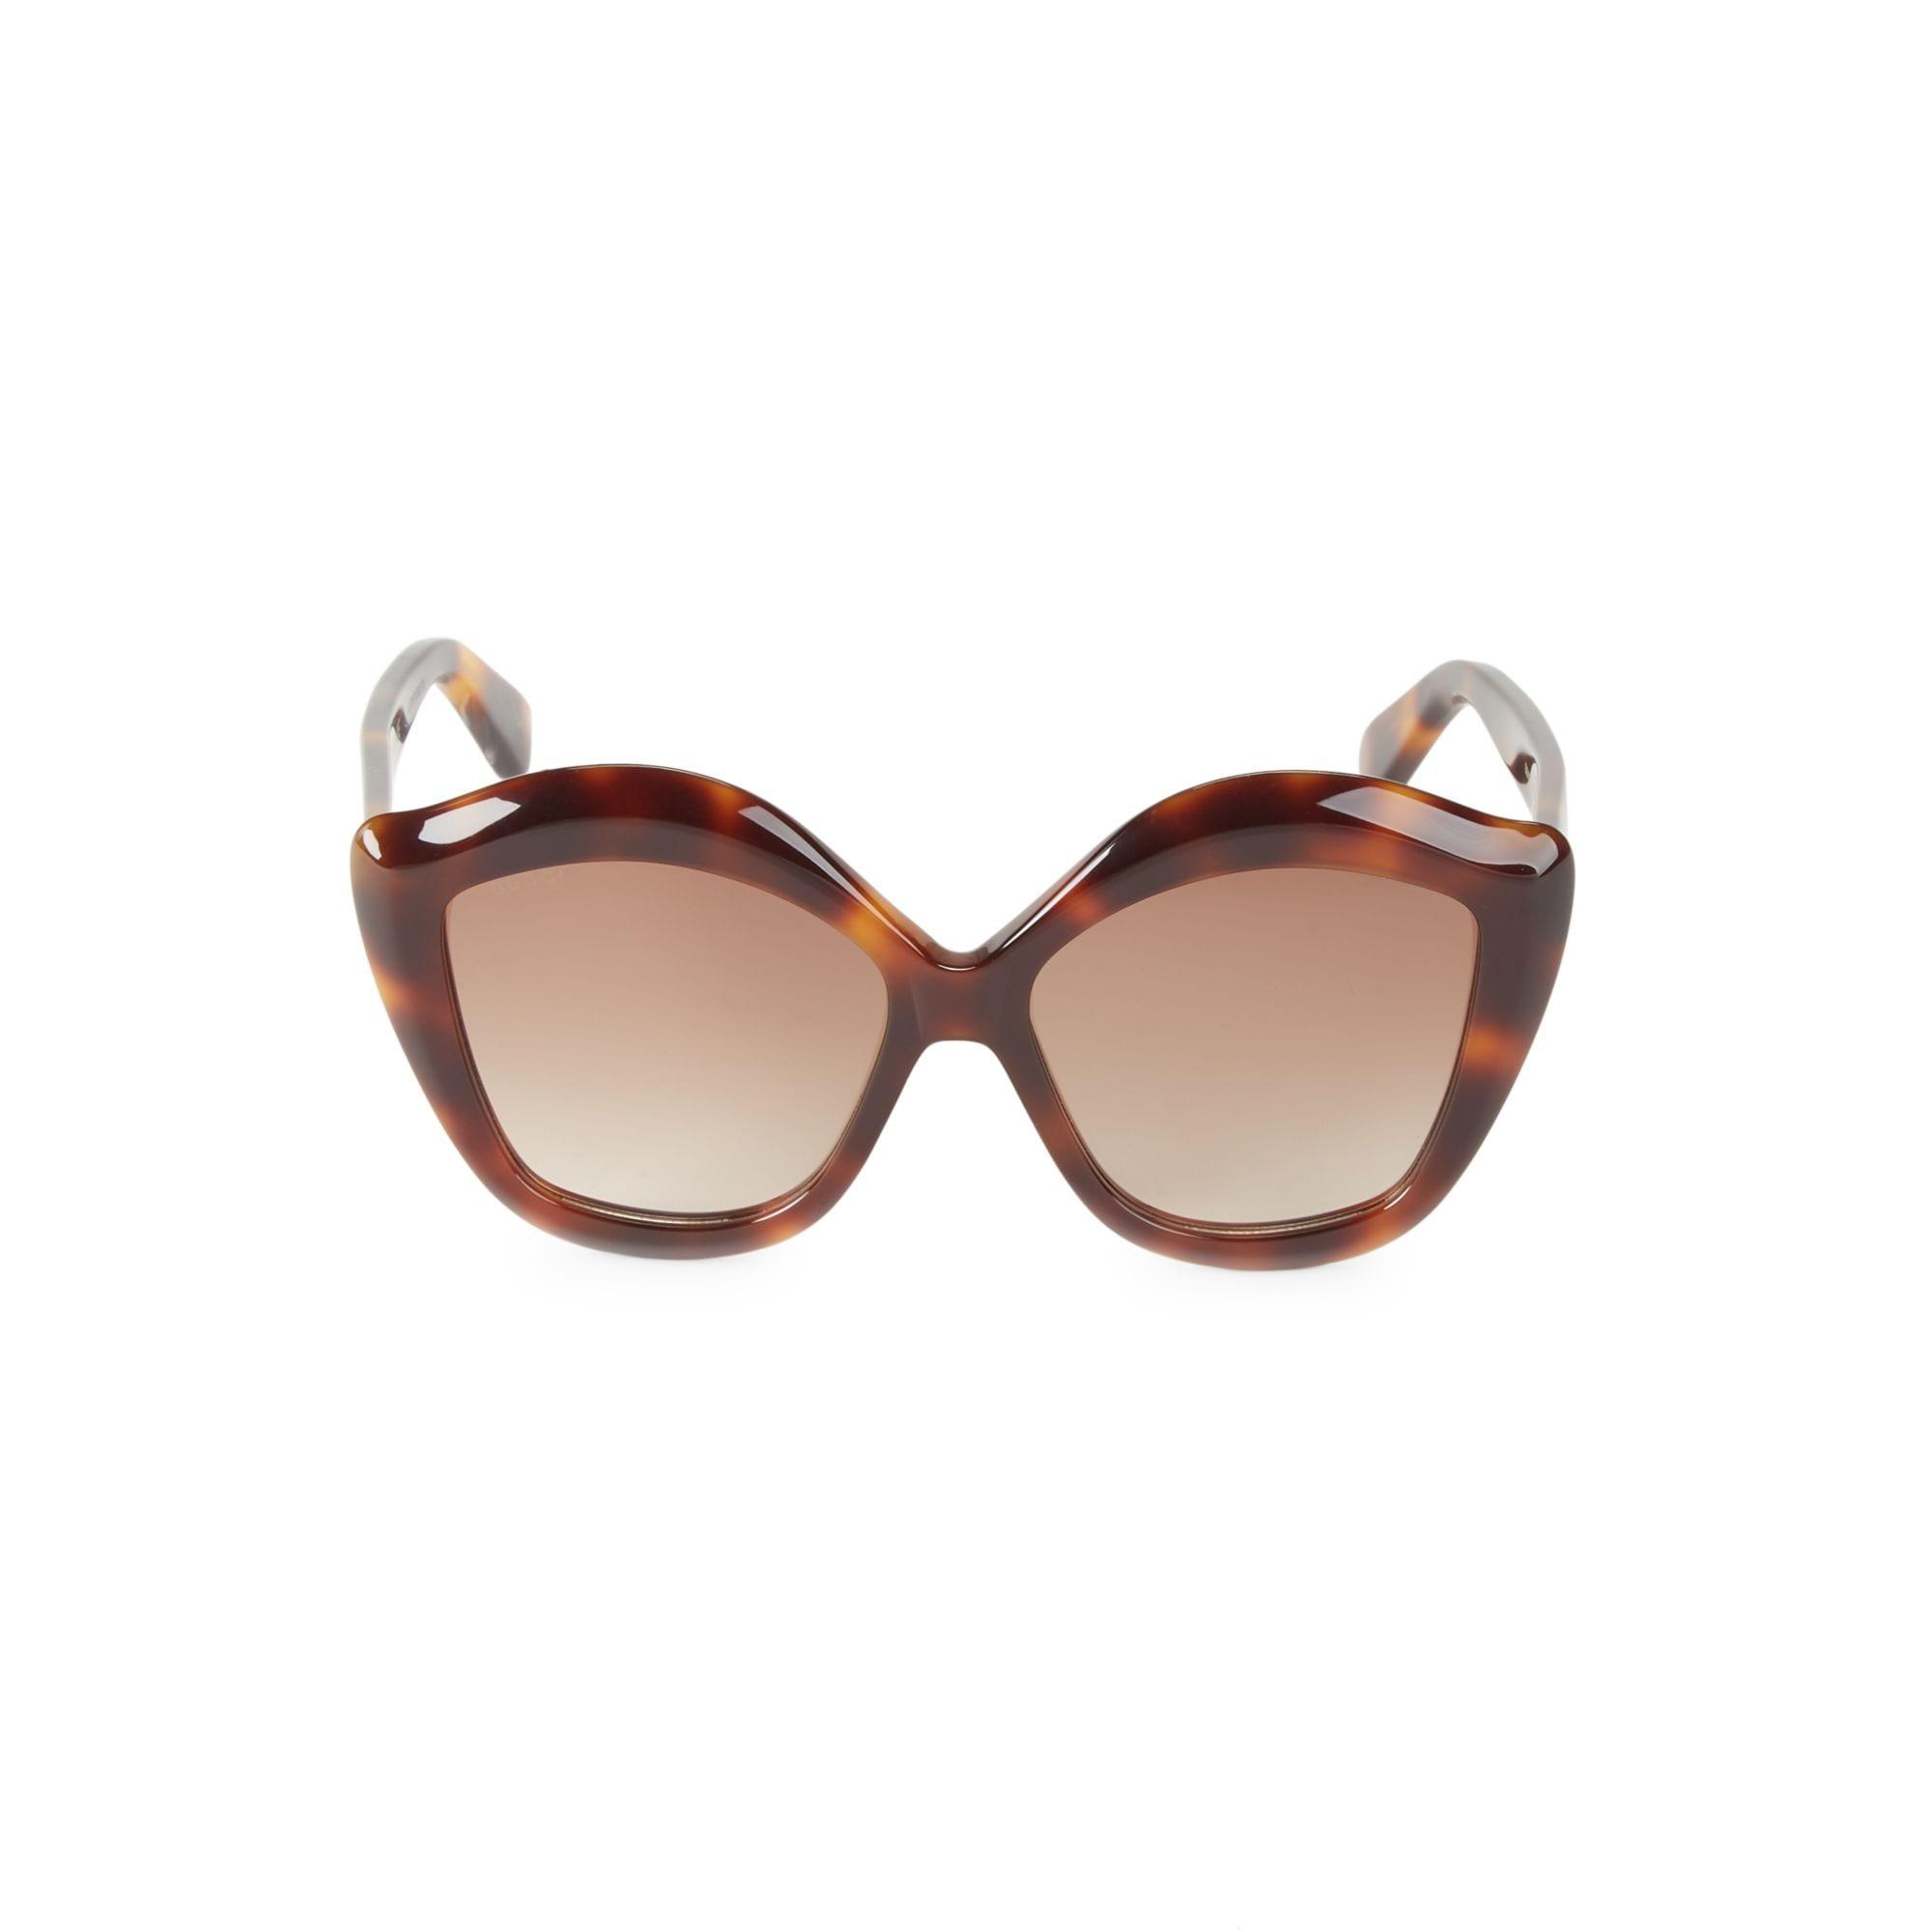 Gucci 53mm Oversized Square Cat Eye Sunglasses in Brown - Lyst